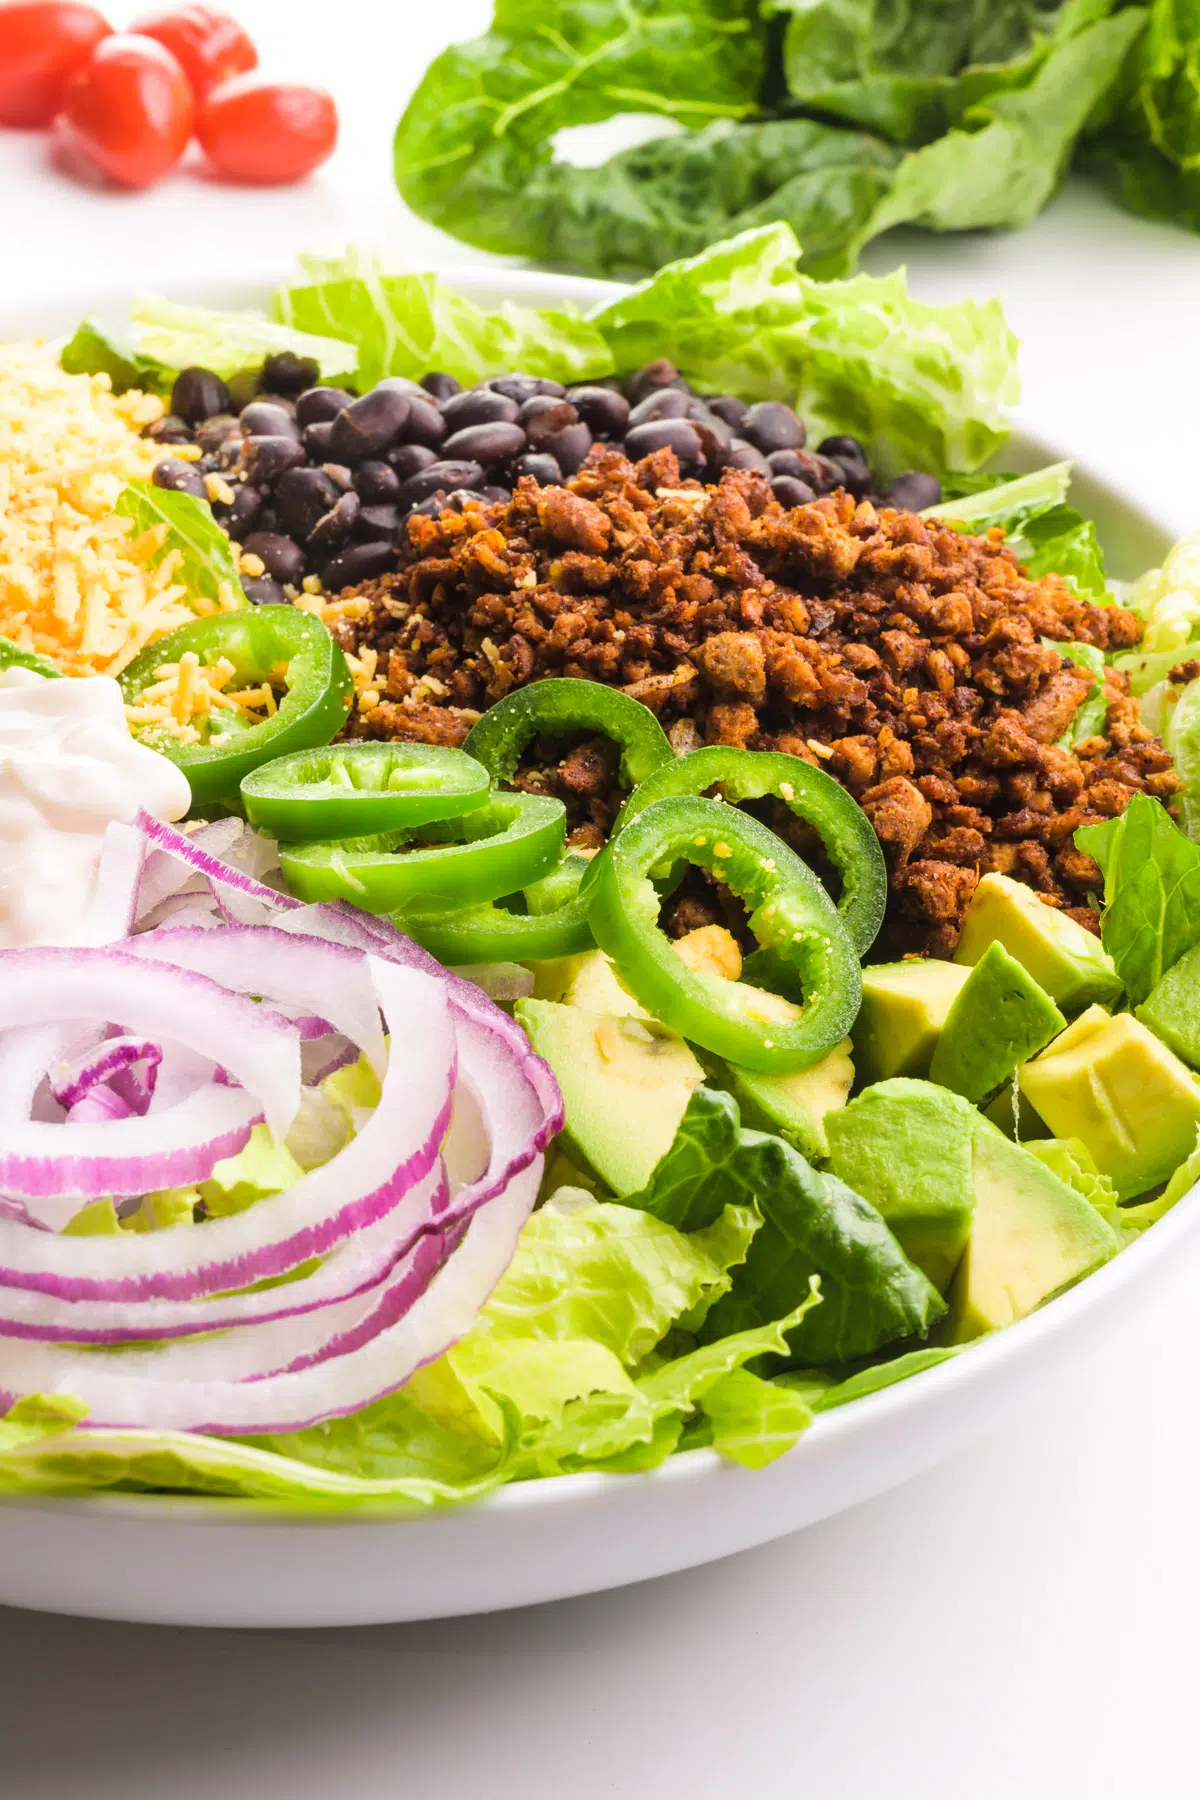 A bowl holds a salad with lots of toppings, such as chopped guacamole, taco veggie crumbles, black beans, vegan cheddar cheese, and more. There is a head of lettuce and tomatoes in the background.